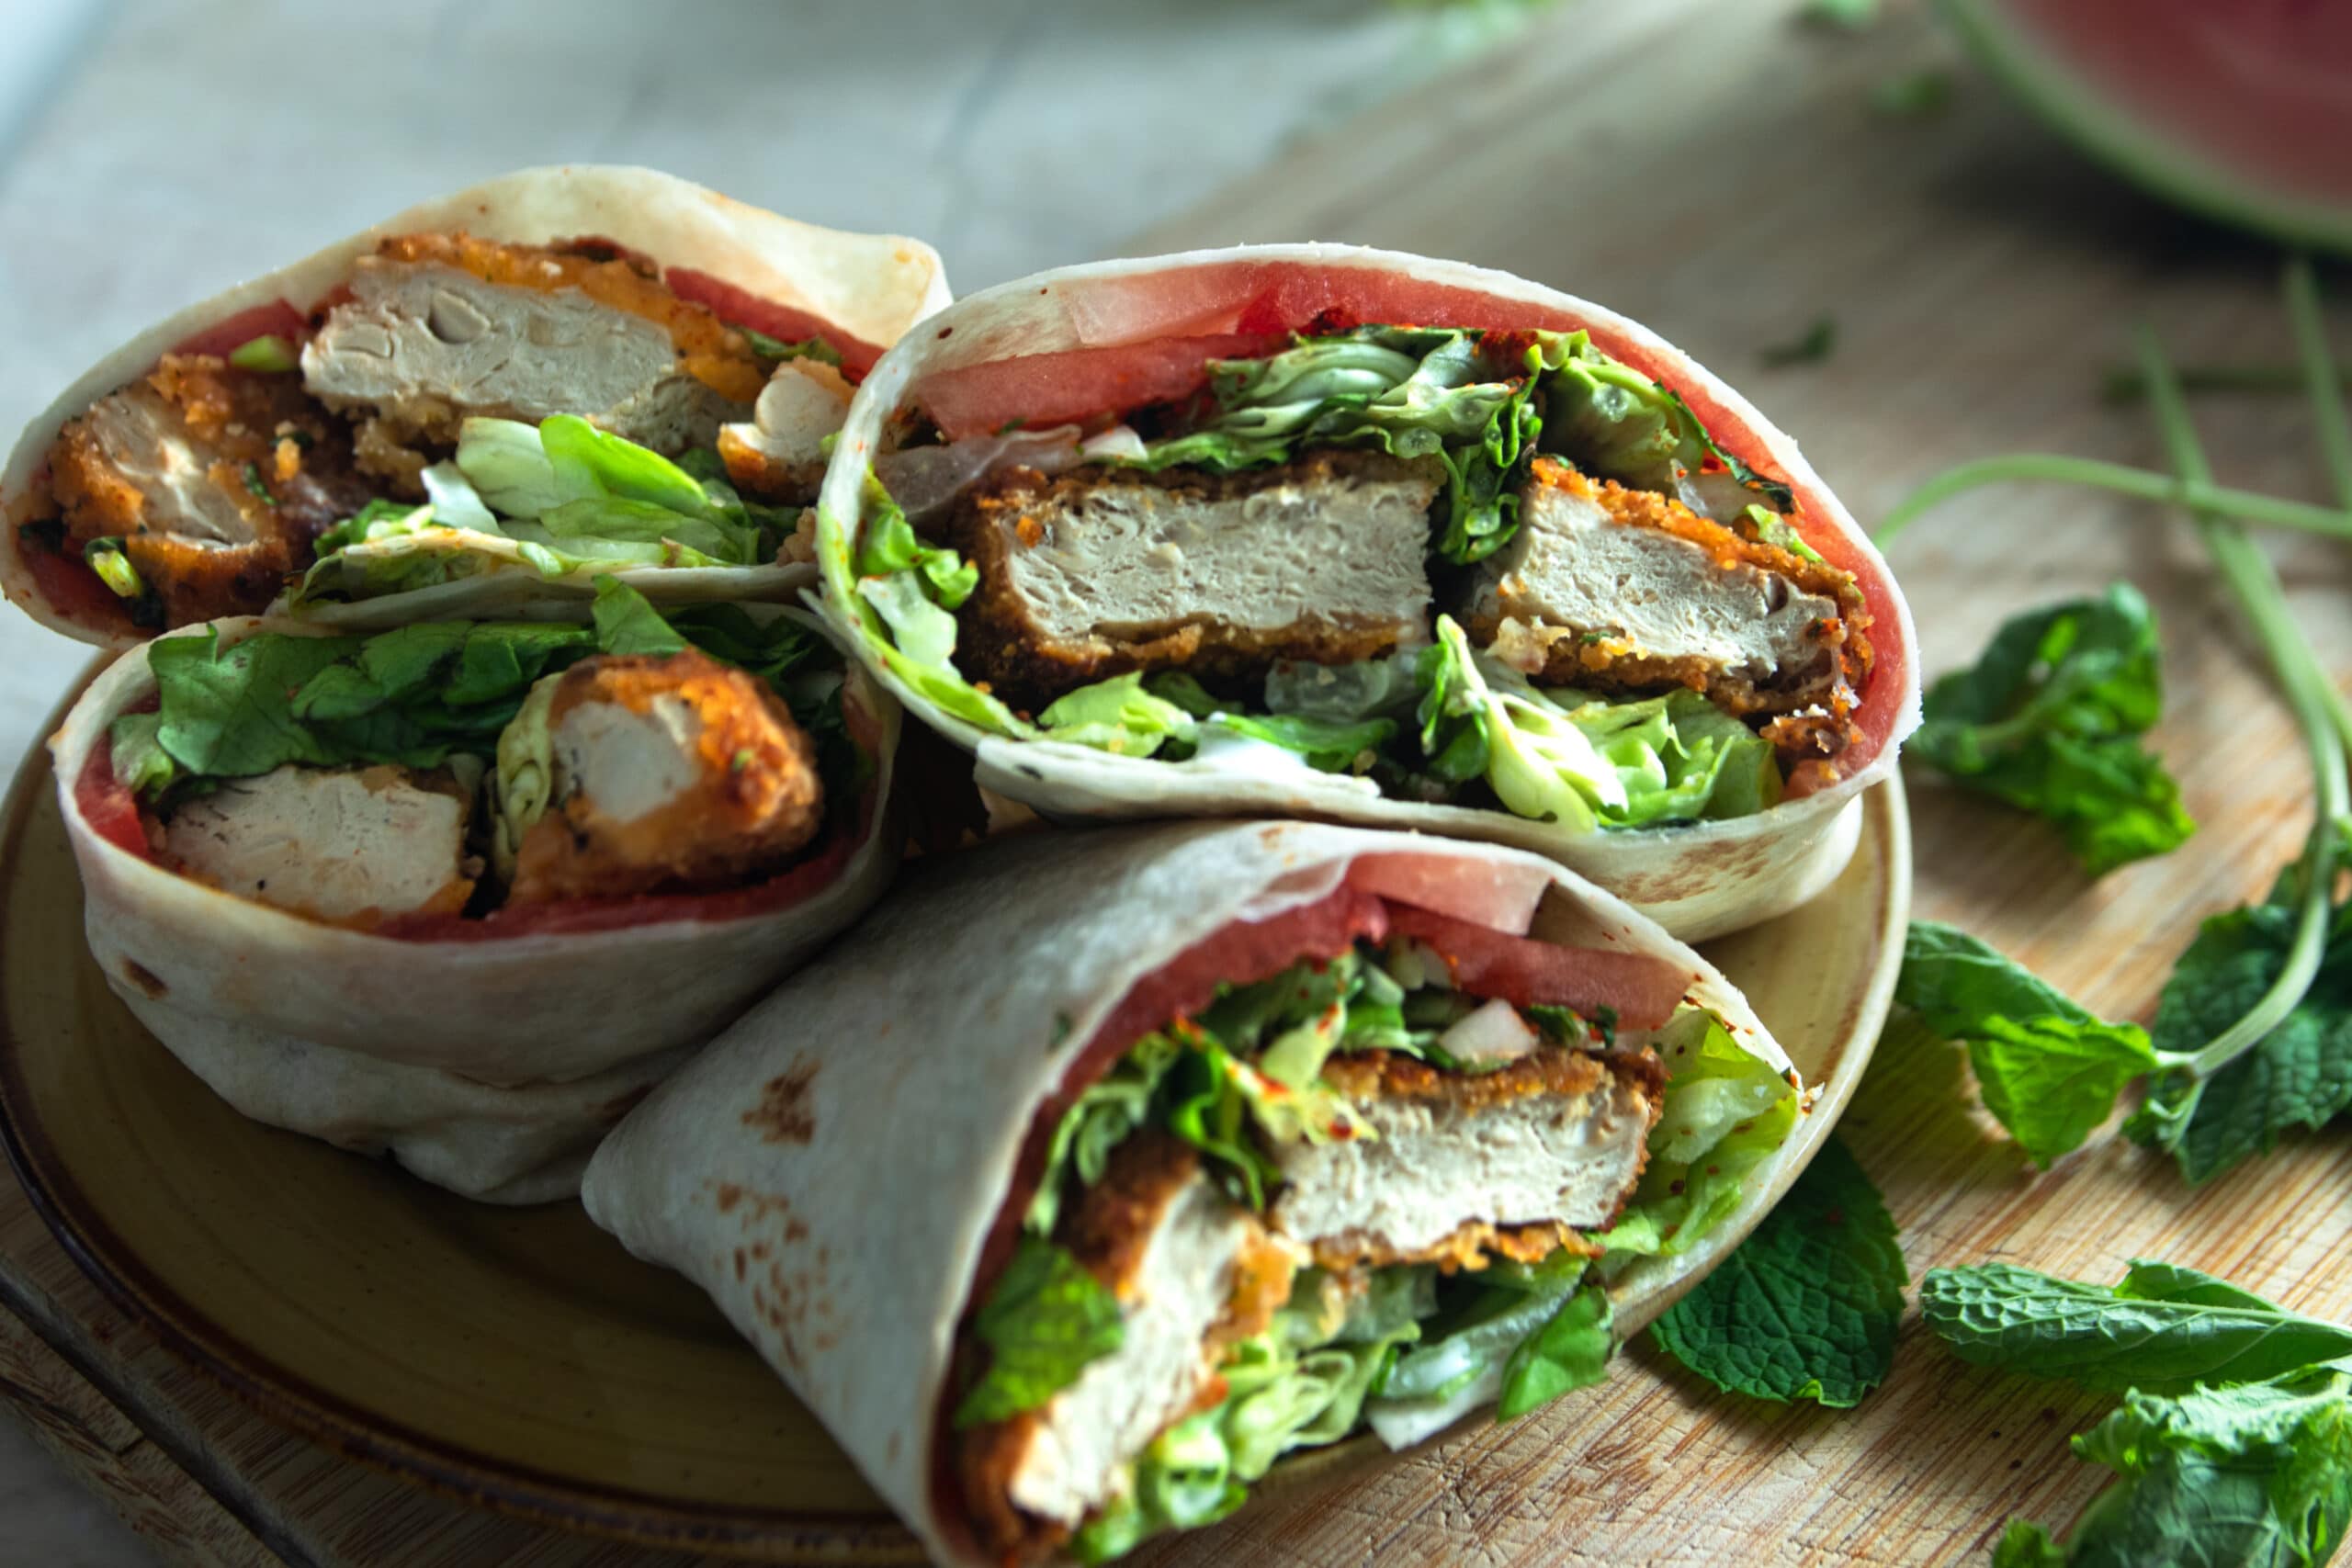 Stacked cut wraps filled with lettuce, seitan, watermelon, and seasonings